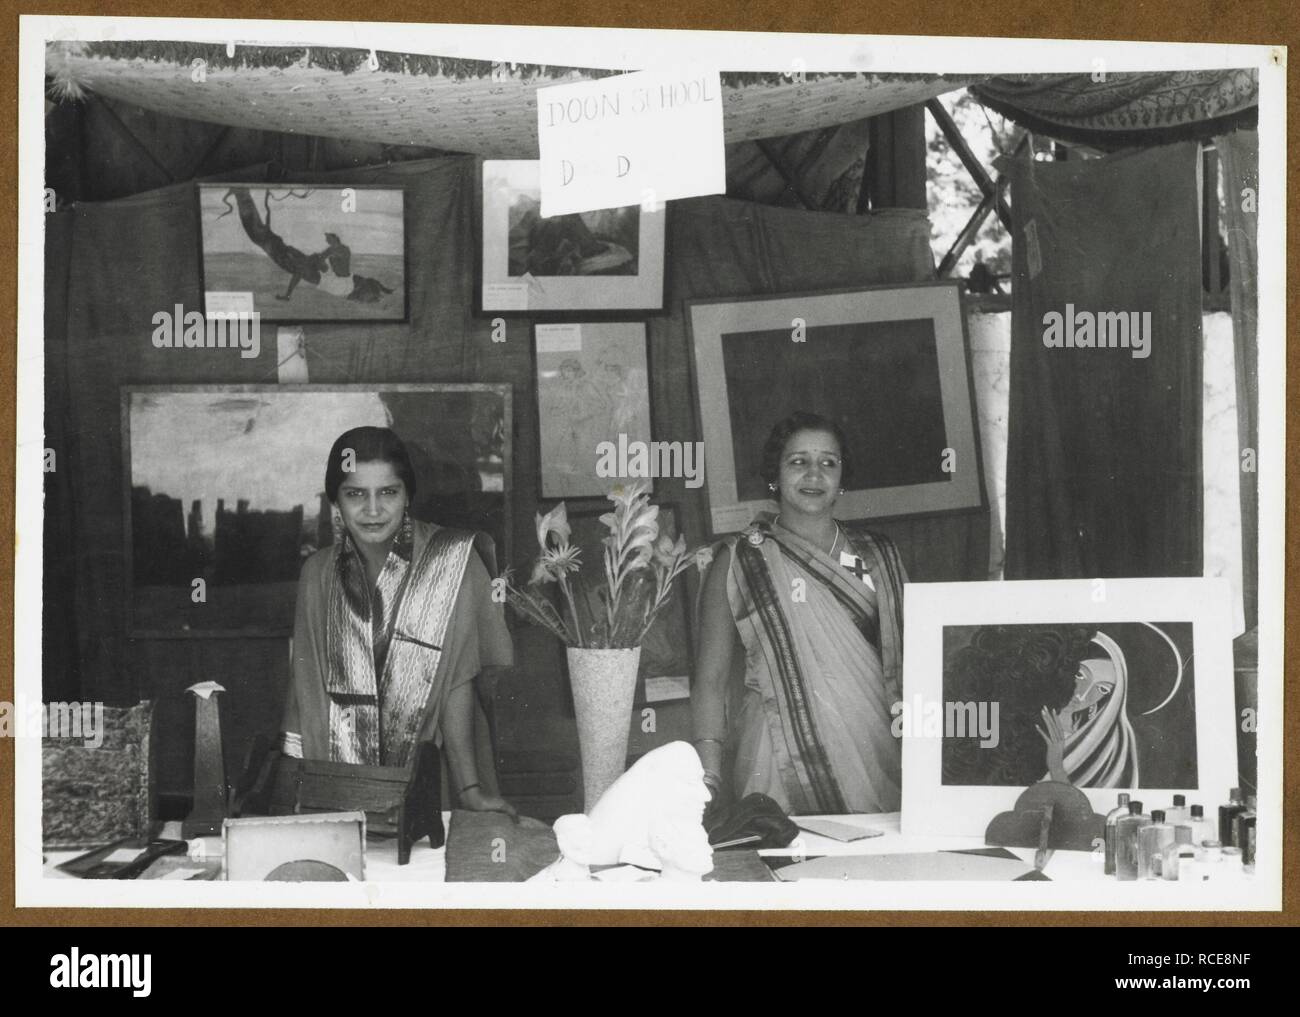 Doon School Stall [at the] Fancy Fair in Aid of the Indian Red Cross for War Purposes Fund, Savoy Hotel, Mussoorie. Two women at a stall selling artwork. Hallett Collection: '[Album] Presented to Lady Hallett by the District War Commitee, Dehra Dun, April 22, 1941'. 10-Jun-40. Photograph. Source: Photo 117/7(11). Author: UNKNOWN. Stock Photo